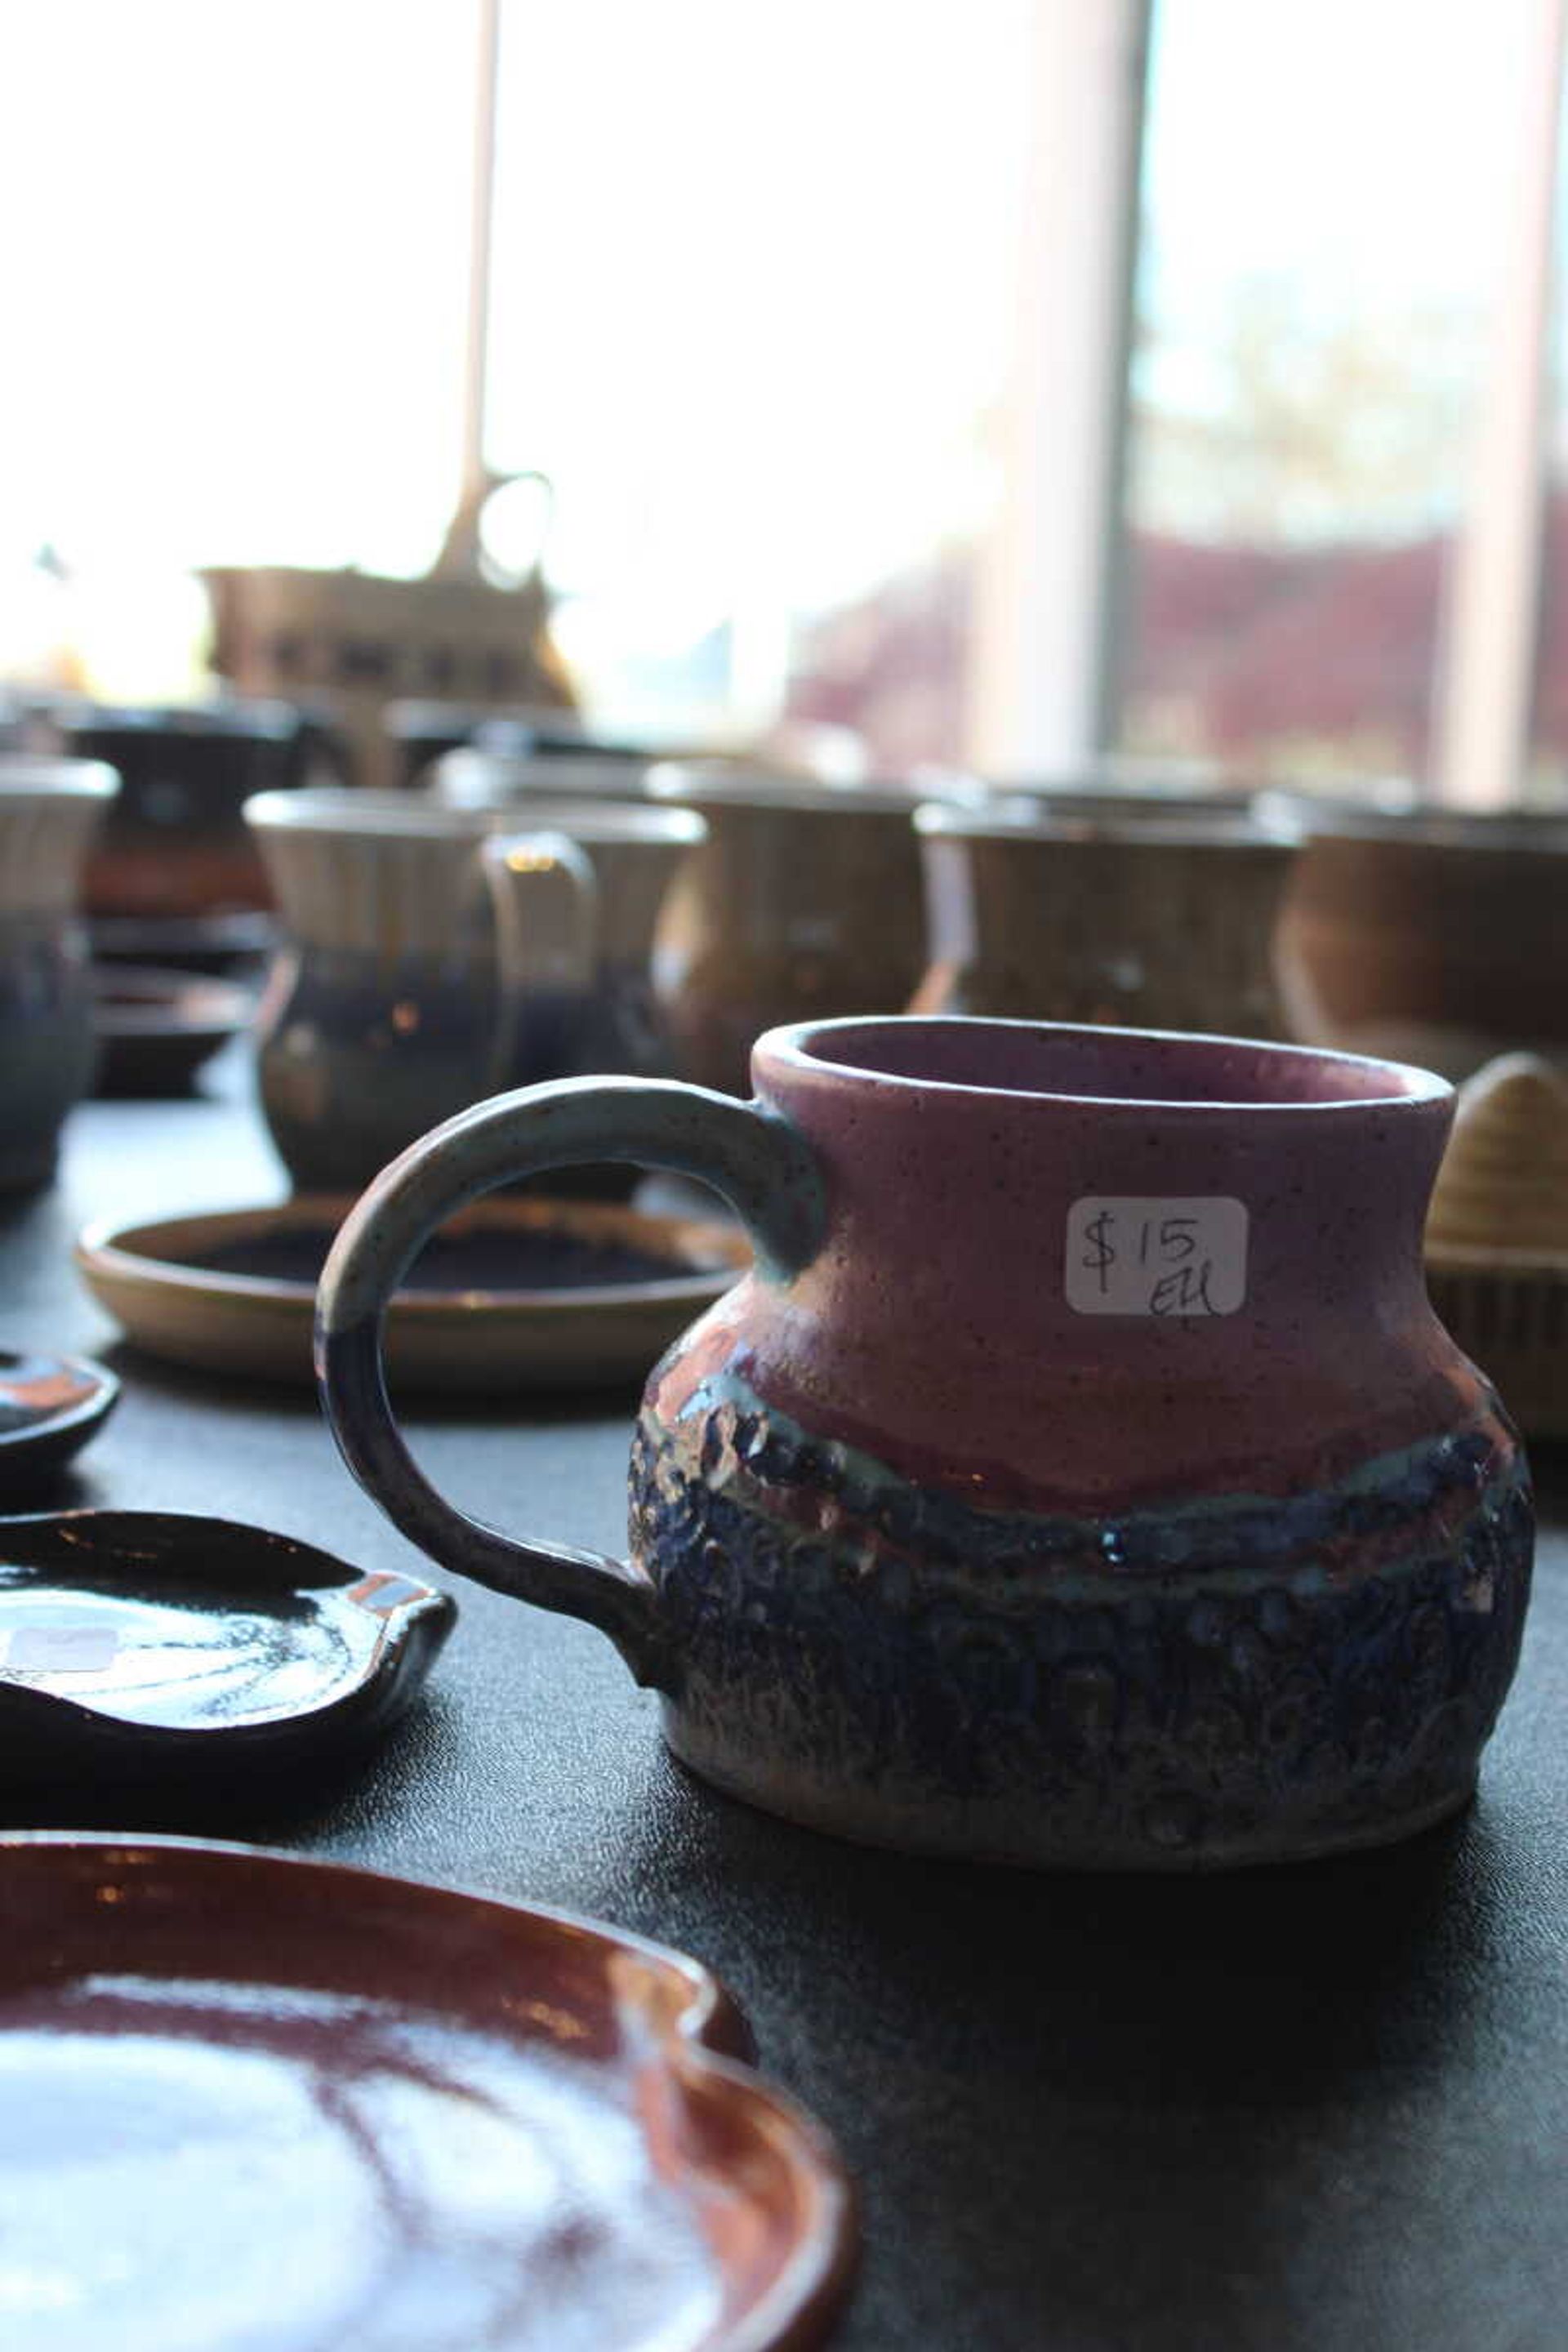 Pottery for sale at Southeast’s Art Guild Annual Show and Sale on Nov. 16.